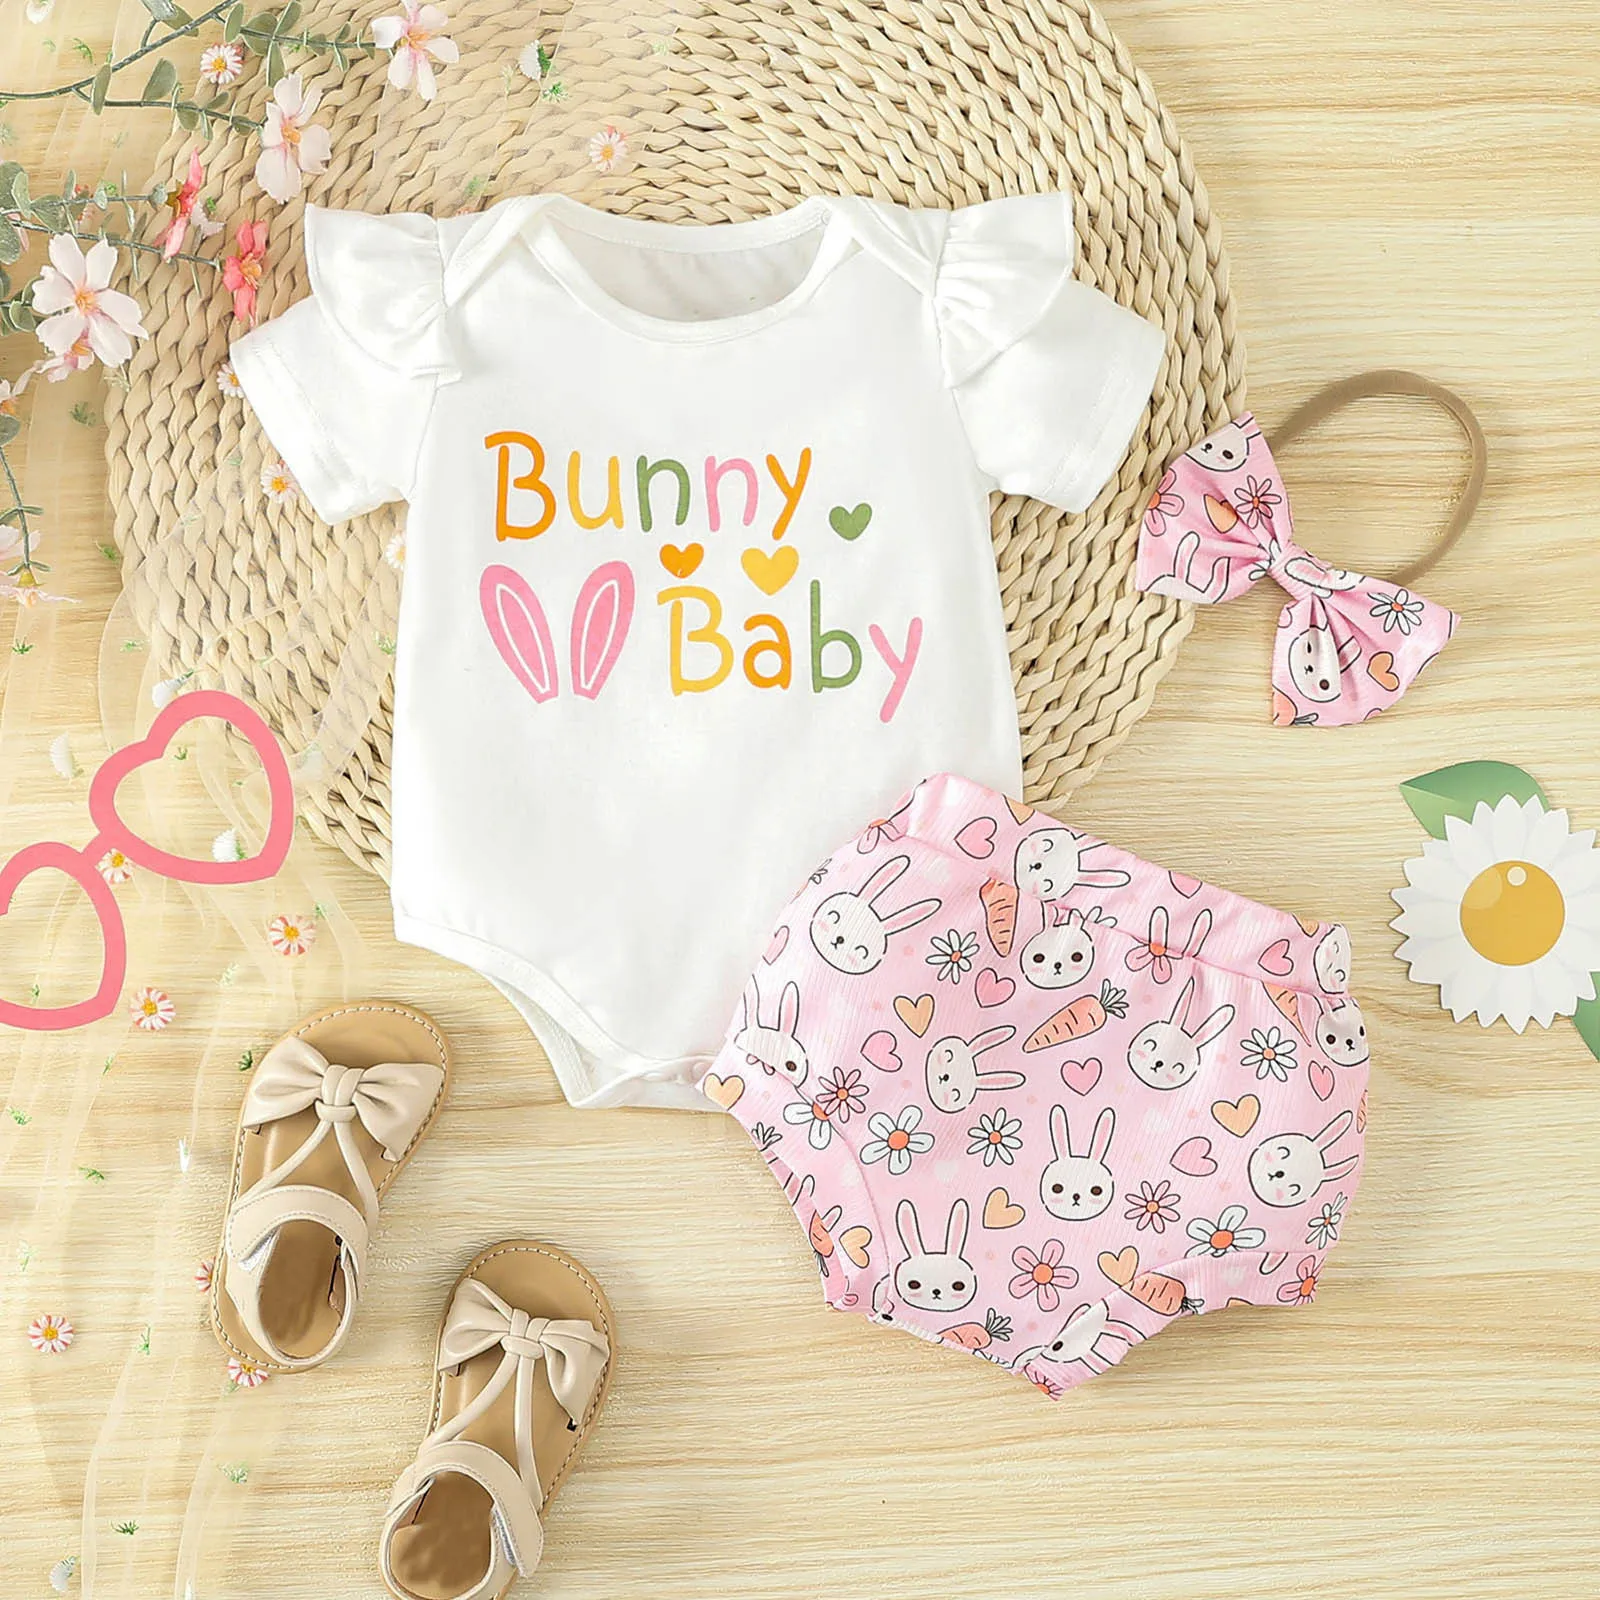 

Infant Girls Easter Outfits Short Sleeve Letter Print Romper Bodysuits Shorts With Headbands Newborn Outfits Baby Clothes 0-24M